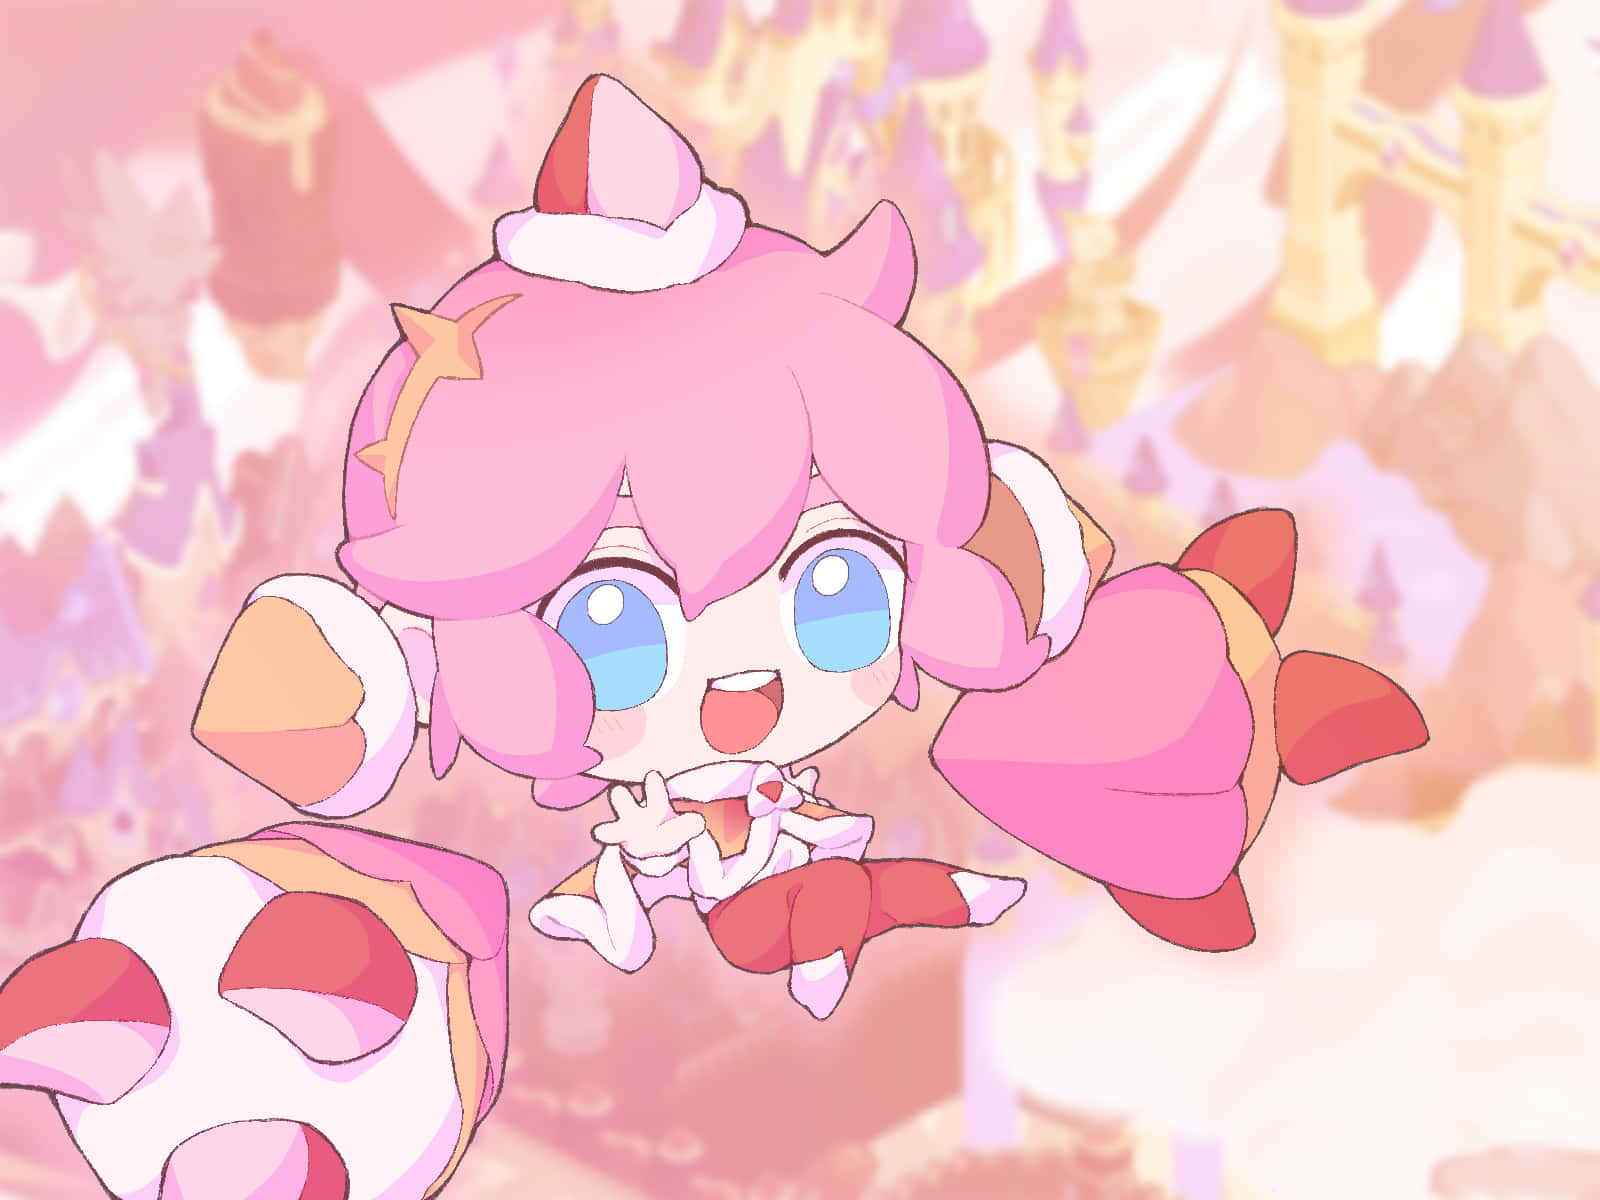 A Pink Character With Big Eyes And Big Ears